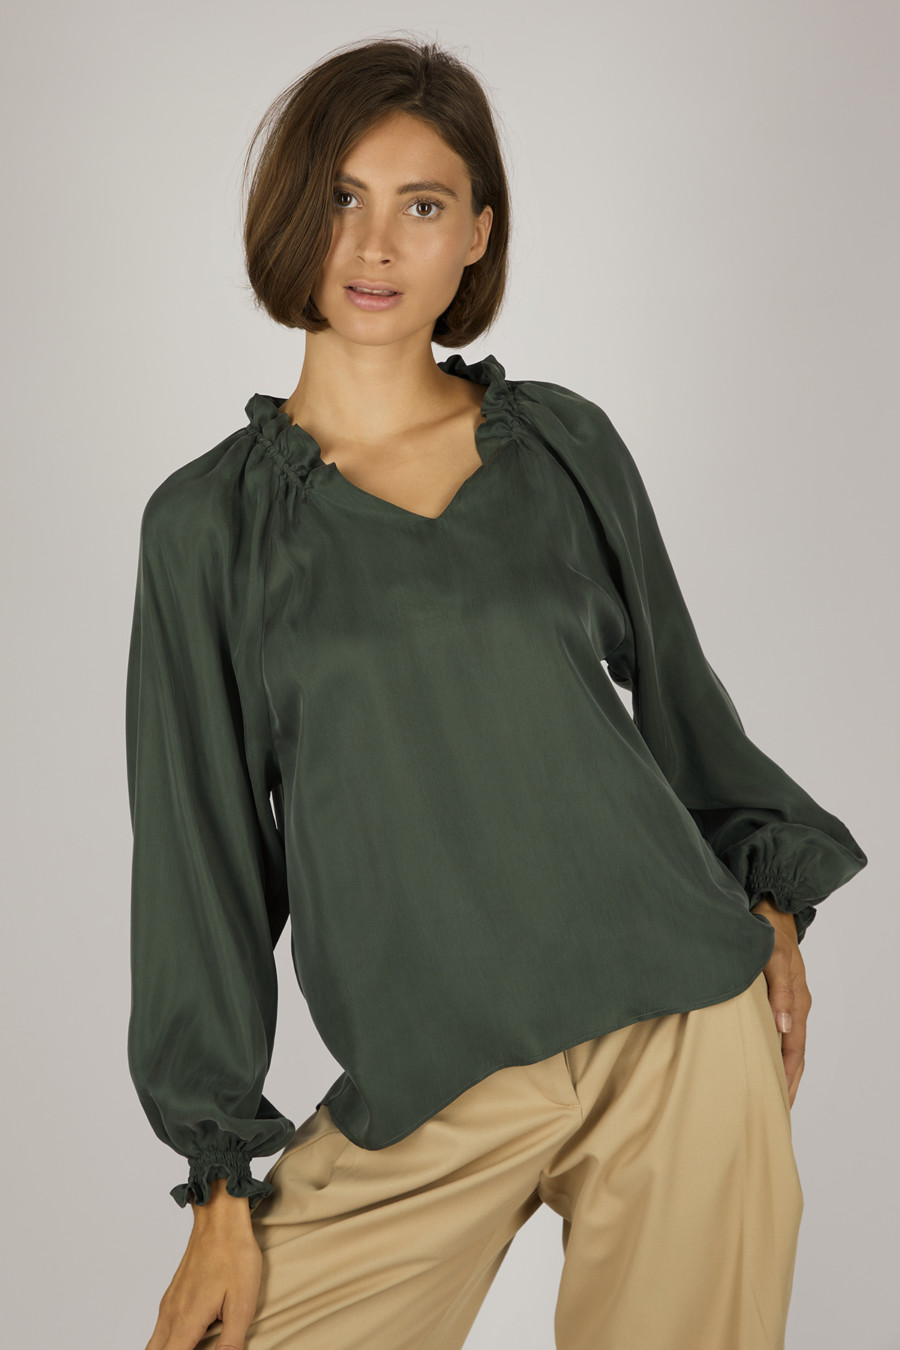 PARIS - Shirt blouse with smocked cuffs - color: Moss